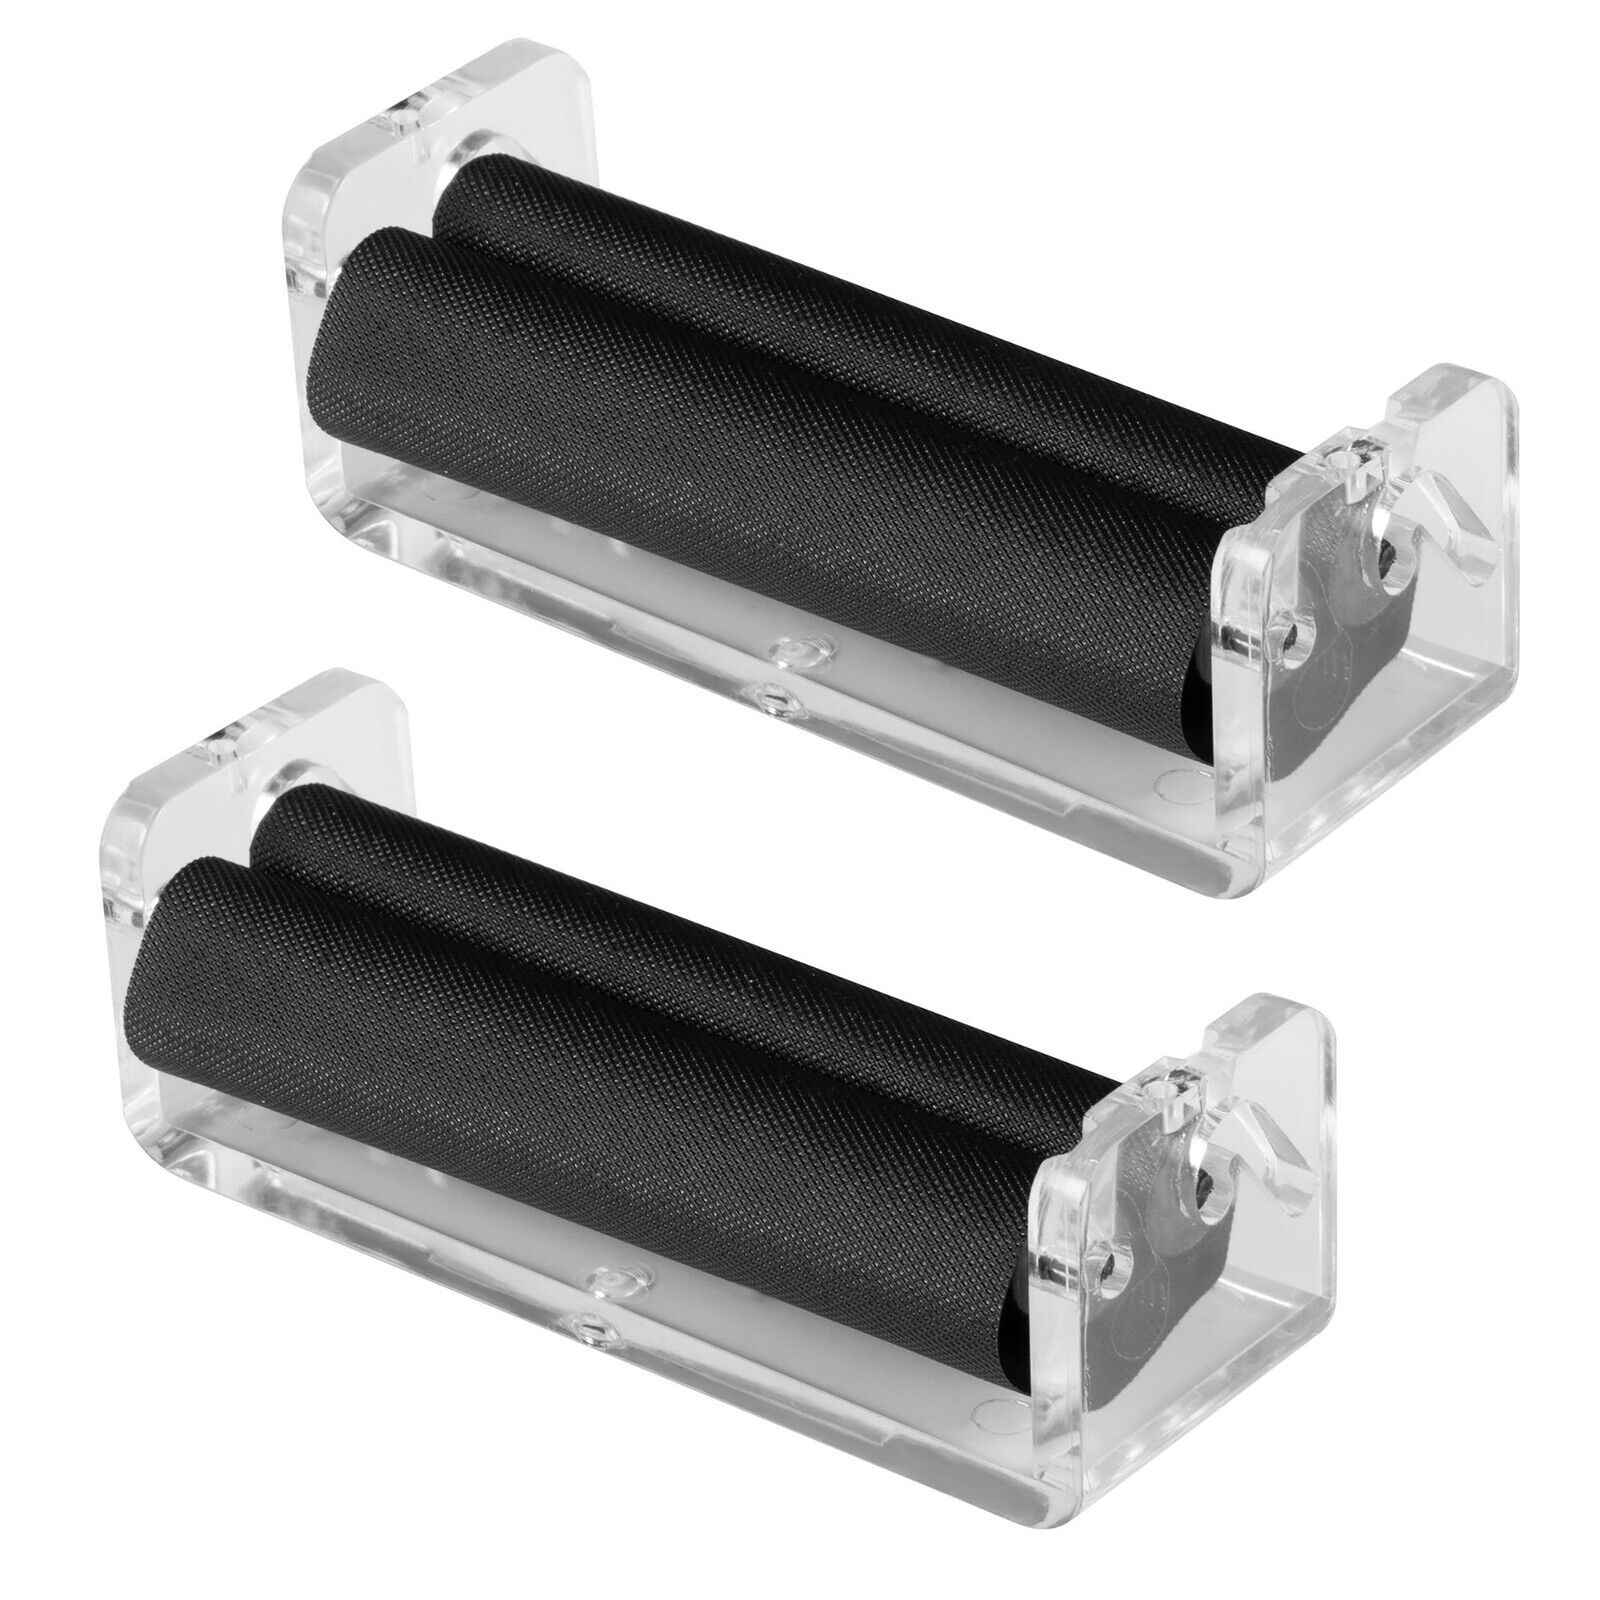 2 Pack 70mm Cigarette Roller Hand Rolling Machine, Acrylic Plastic for Manual